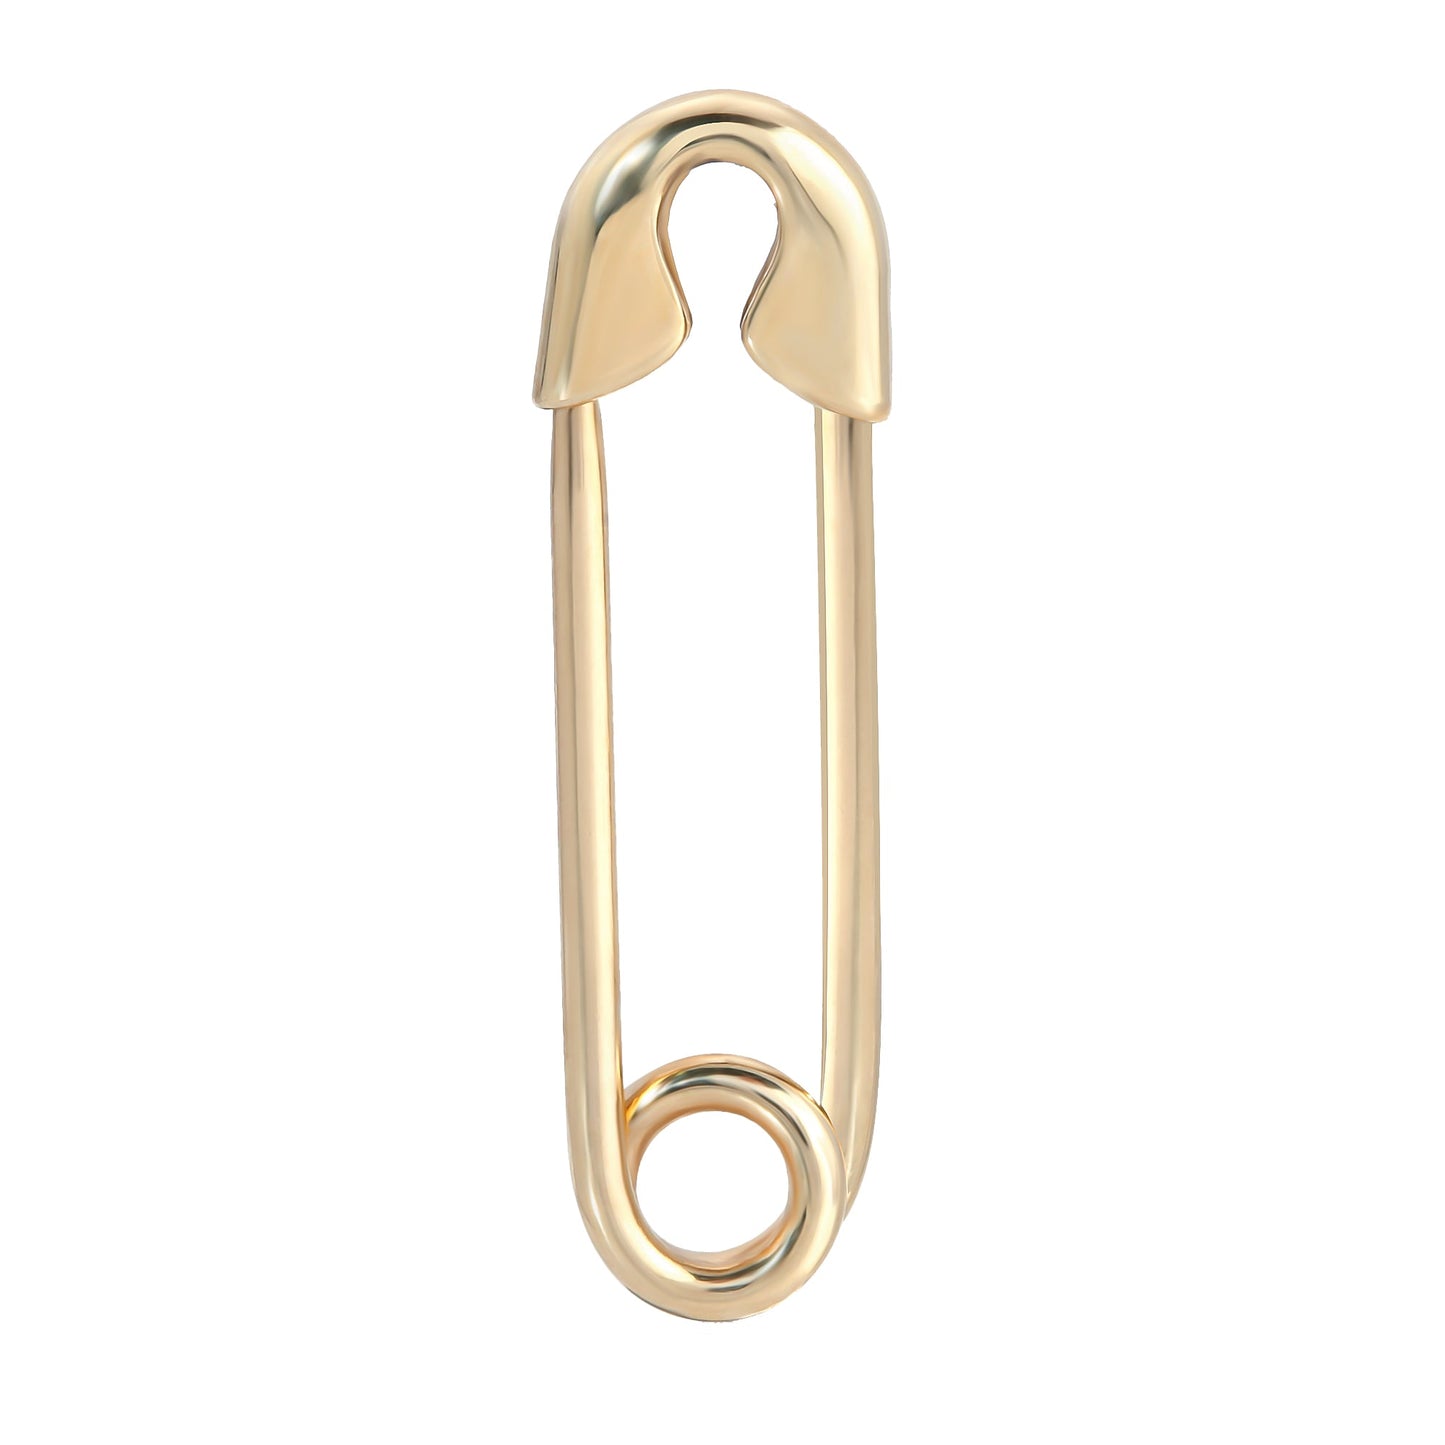 14K GOLD SAFETY PIN EARRING by eklexic